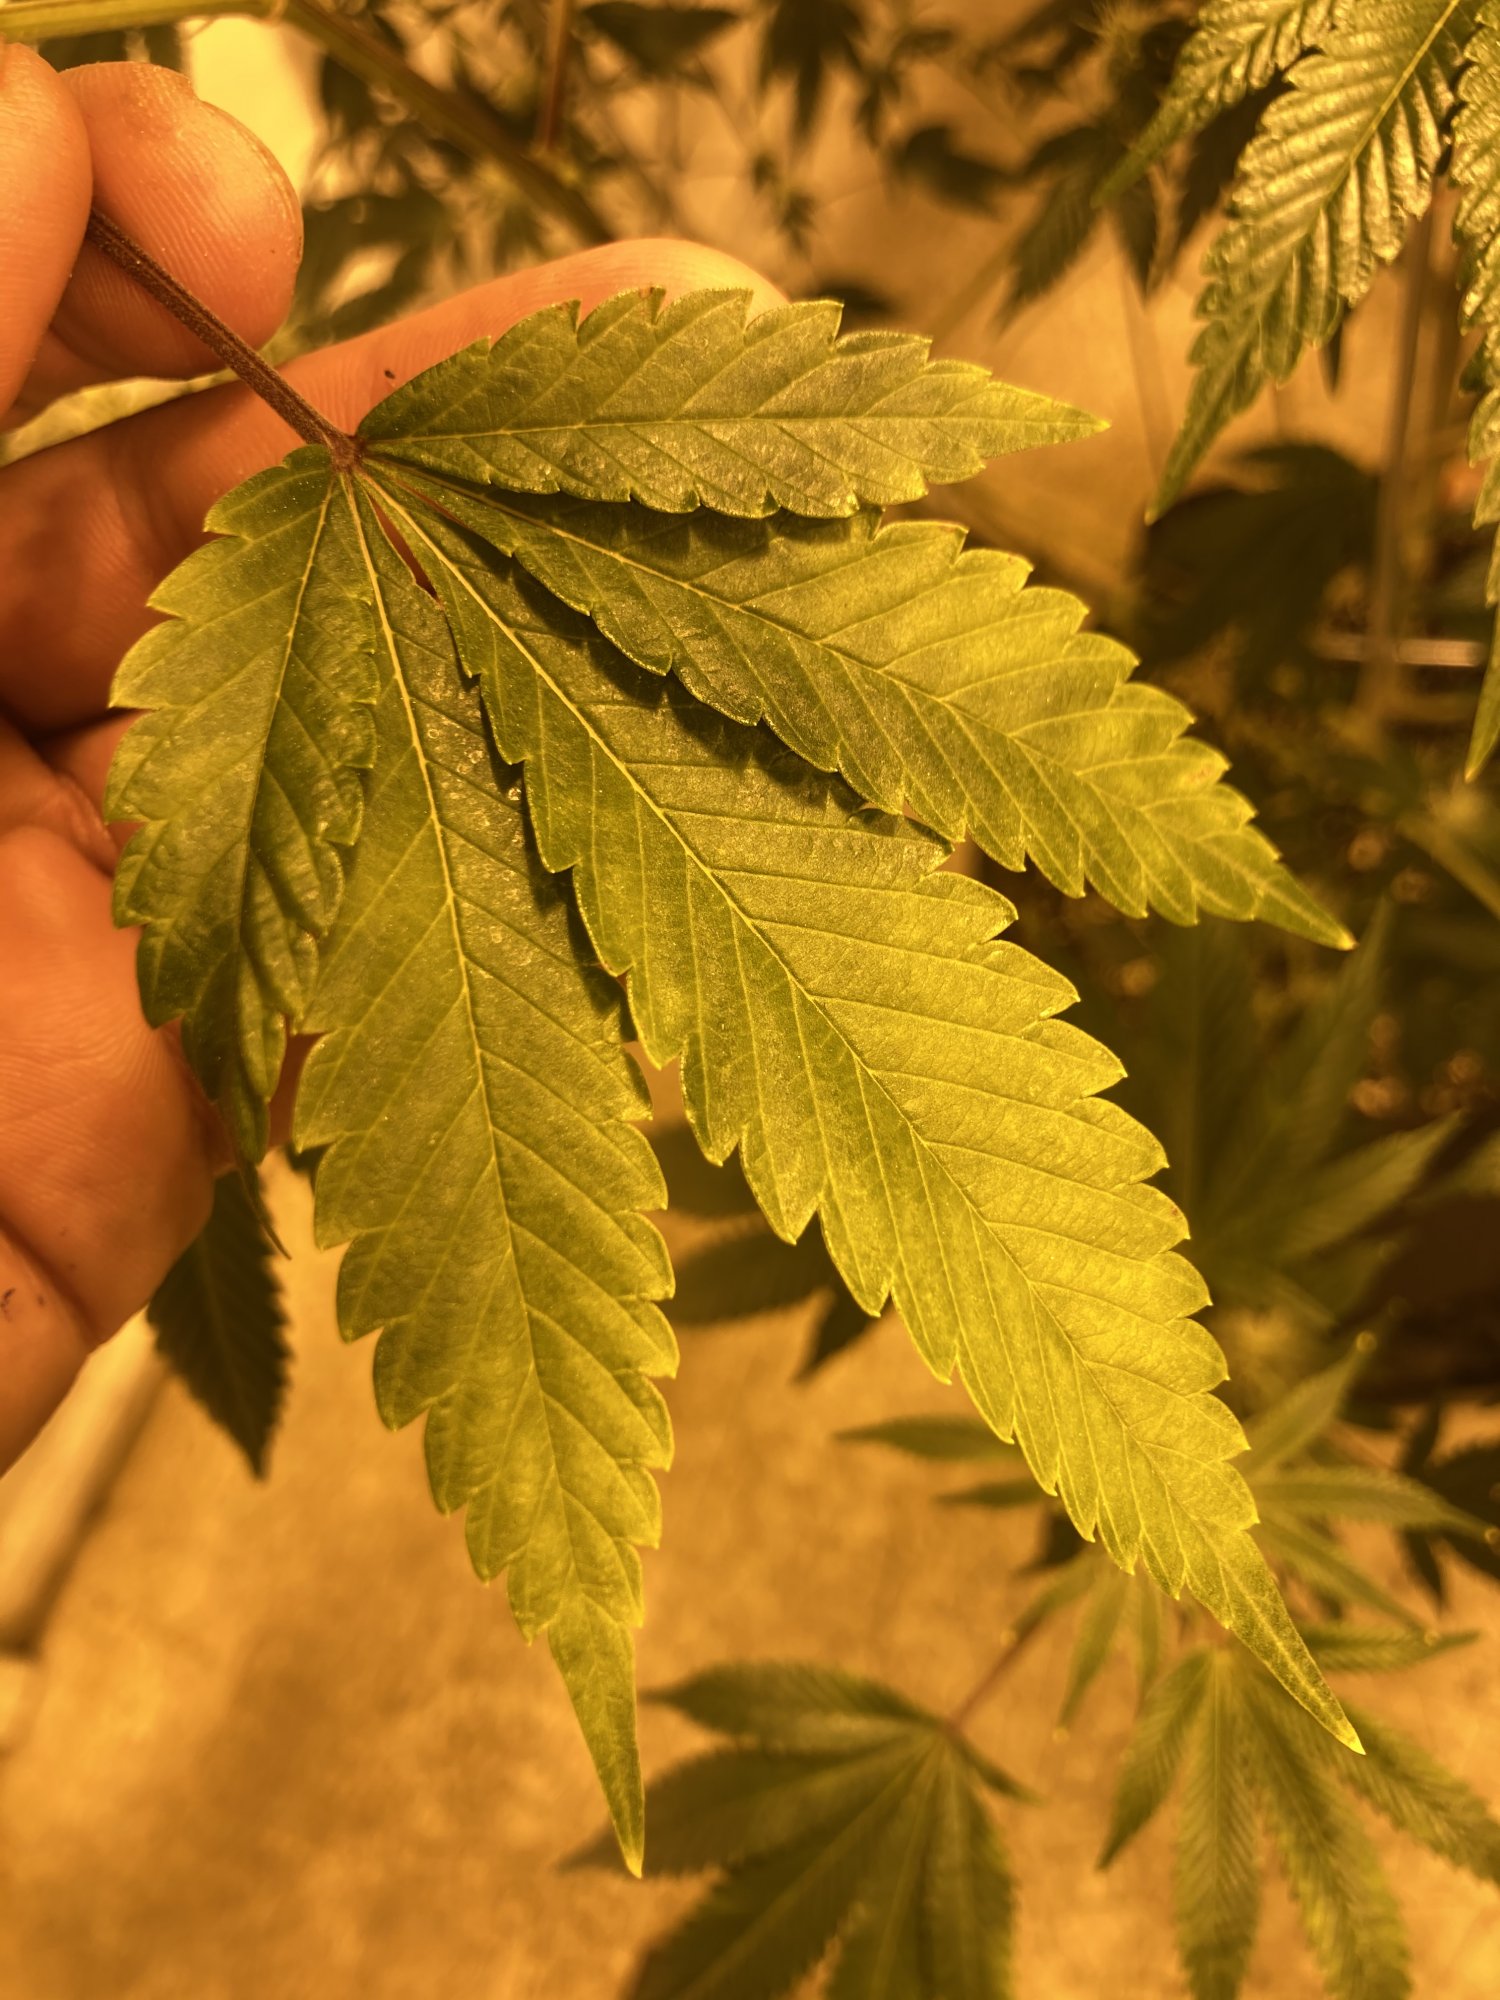 Plants leave color not looking healthy